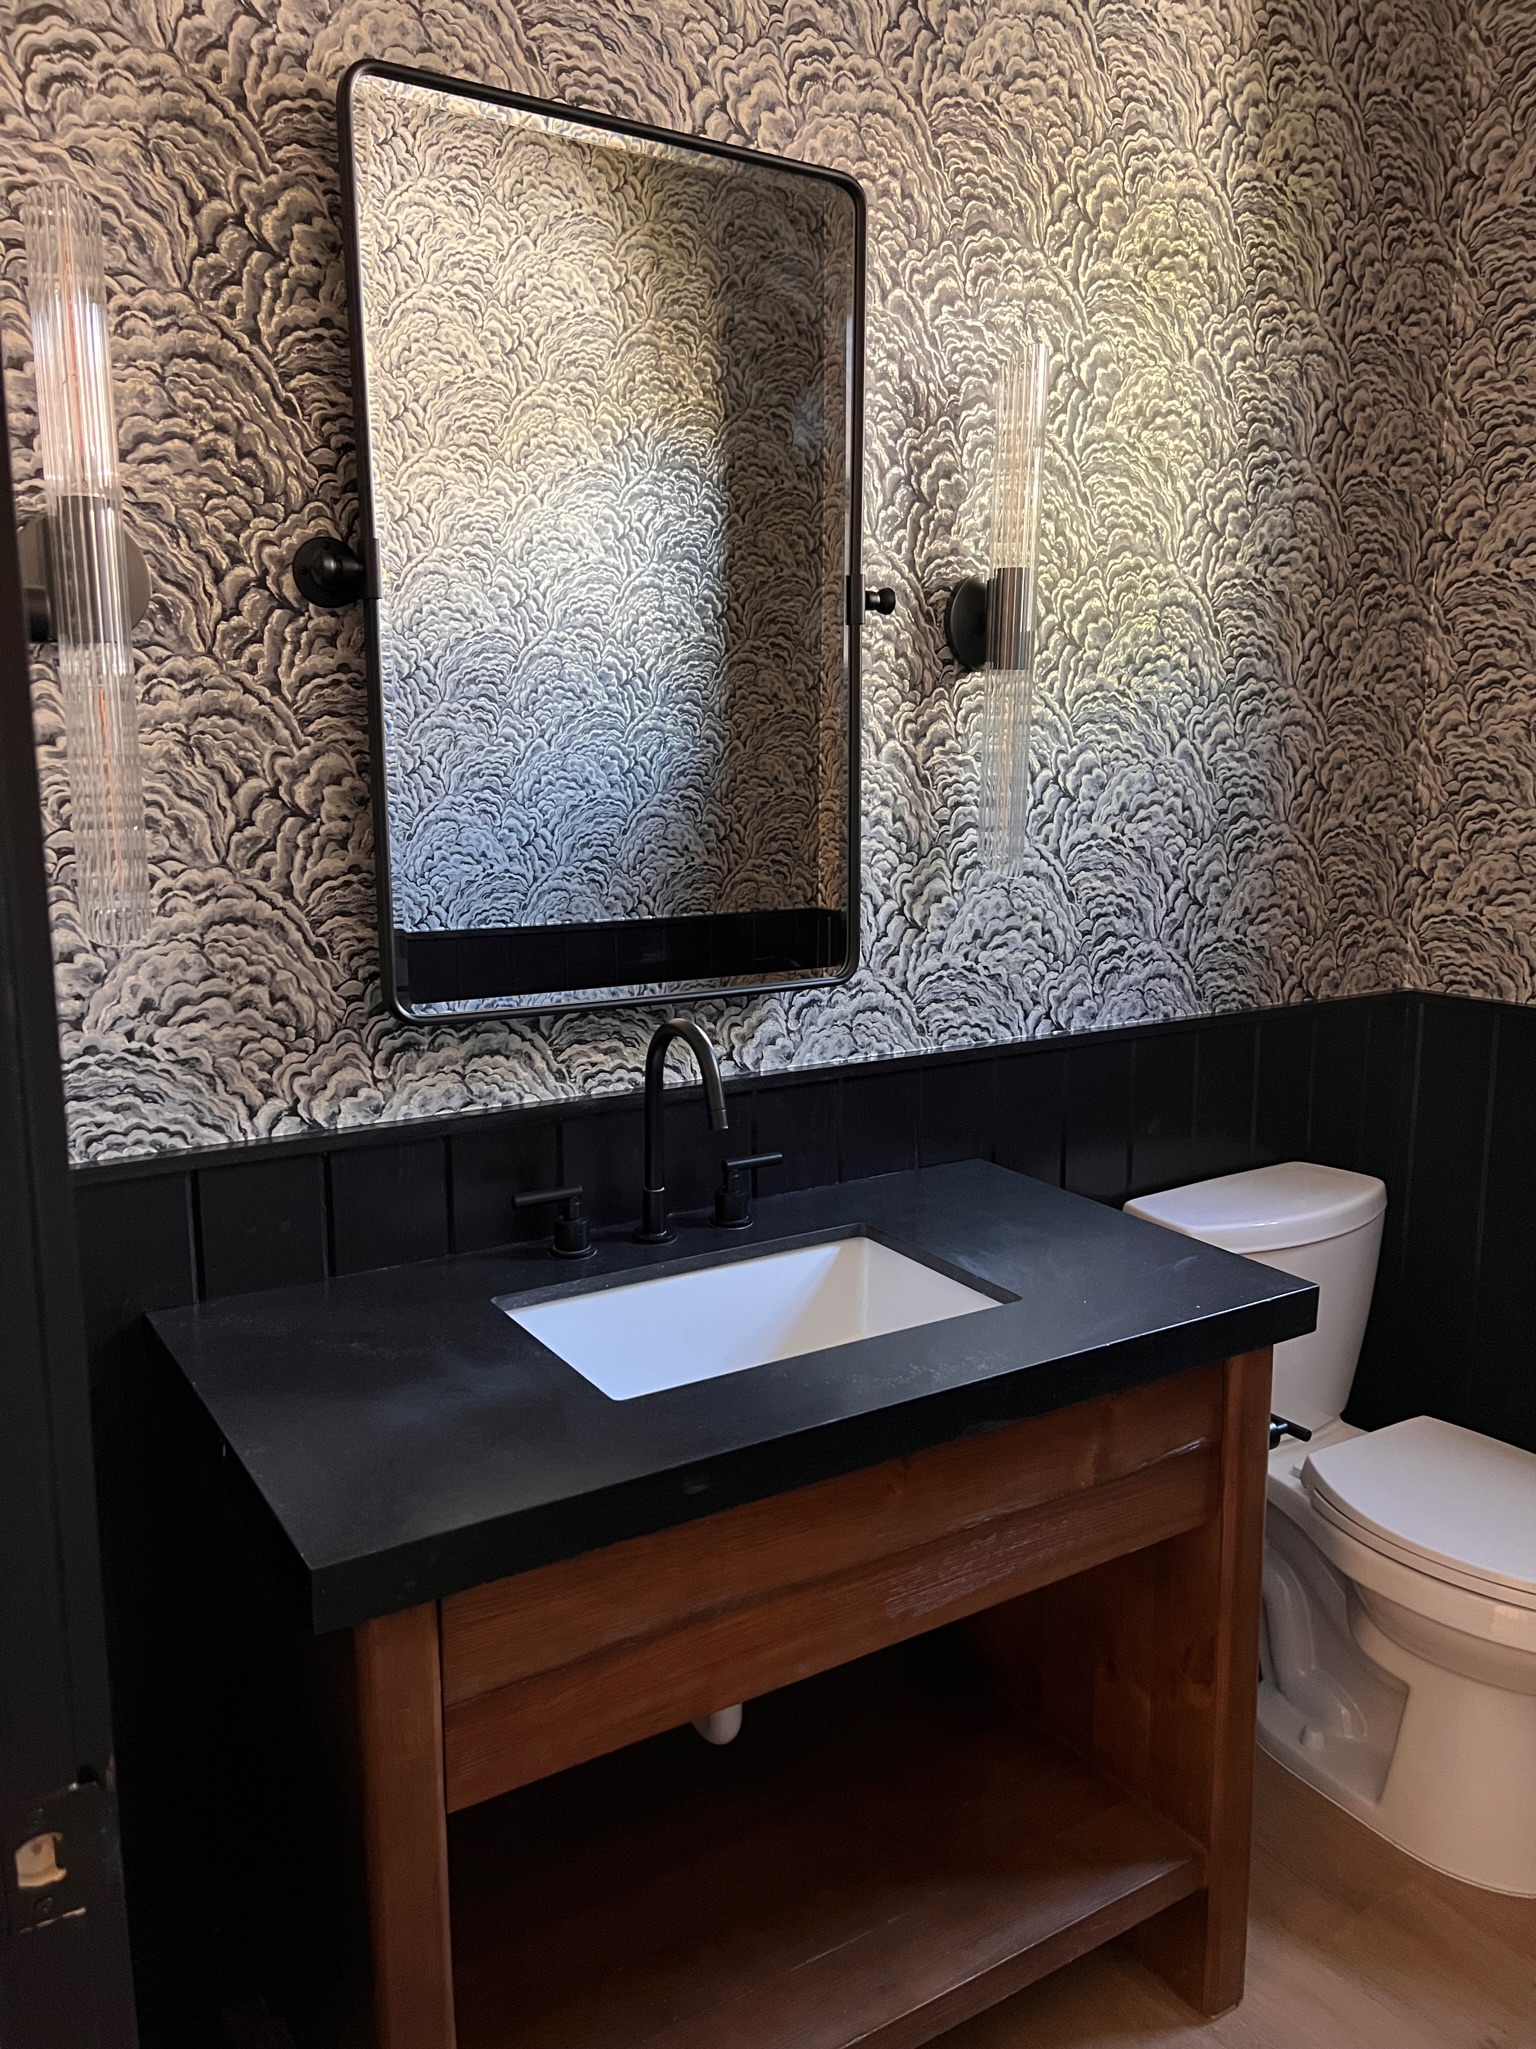 This bathroom uses a dark patterned wallpaper to give a sophisticated touch.